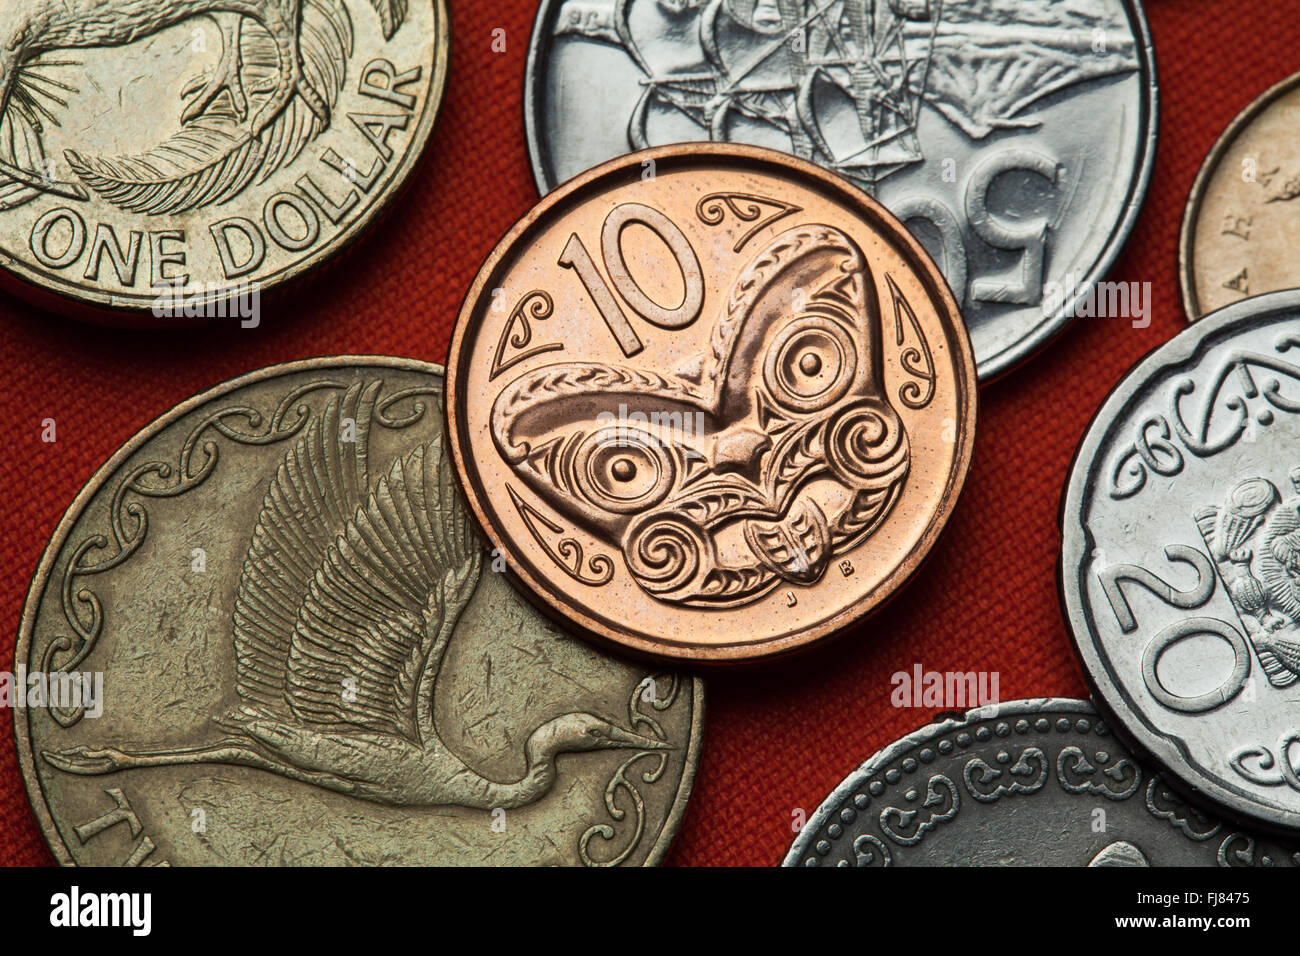 Coins of New Zealand. Maori carved head called koruru depicted in the New Zealand 10 cents coin. Stock Photo